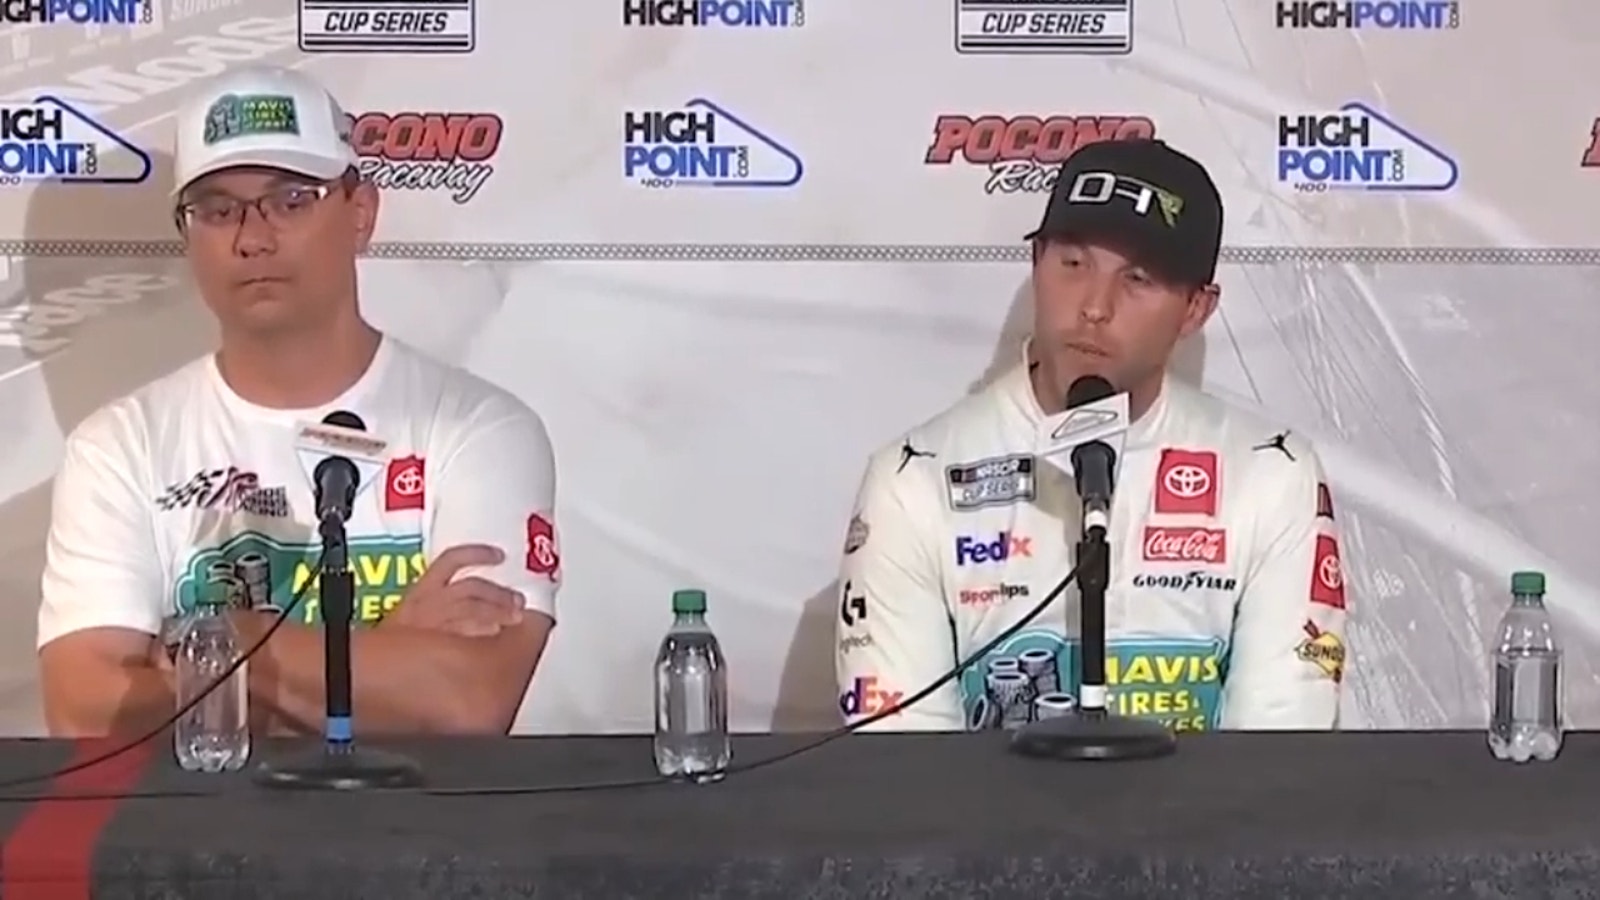 Denny Hamlin responded to Kyle Larson saying that Sunday's move was like the one Hamlin pulled on Ross Chastain last year at Pocono.